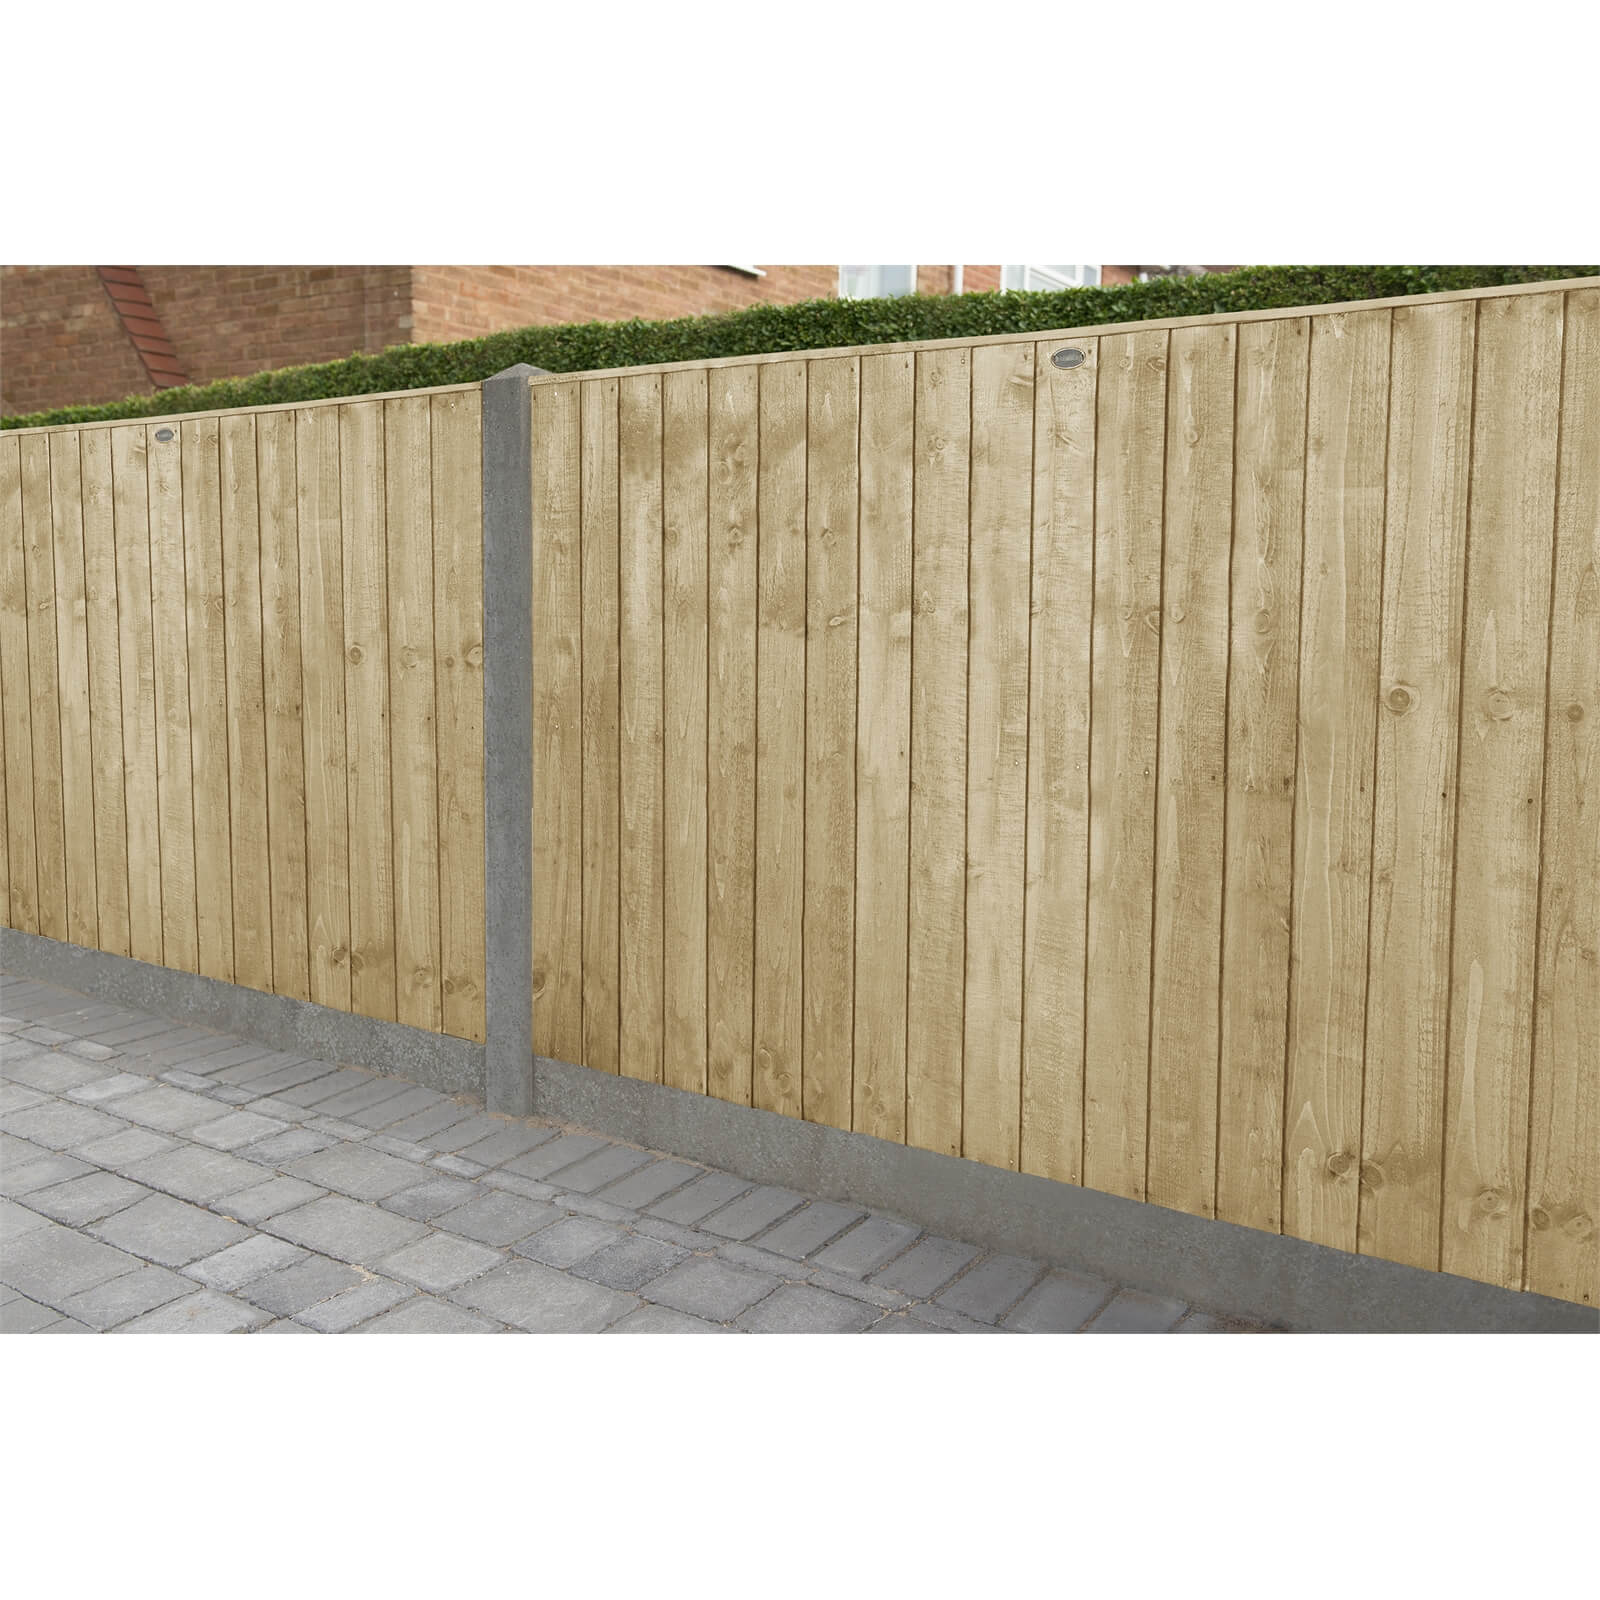 6ft x 4ft (1.83m x 1.23m) Pressure Treated Featheredge Fence Panel - Pack of 5